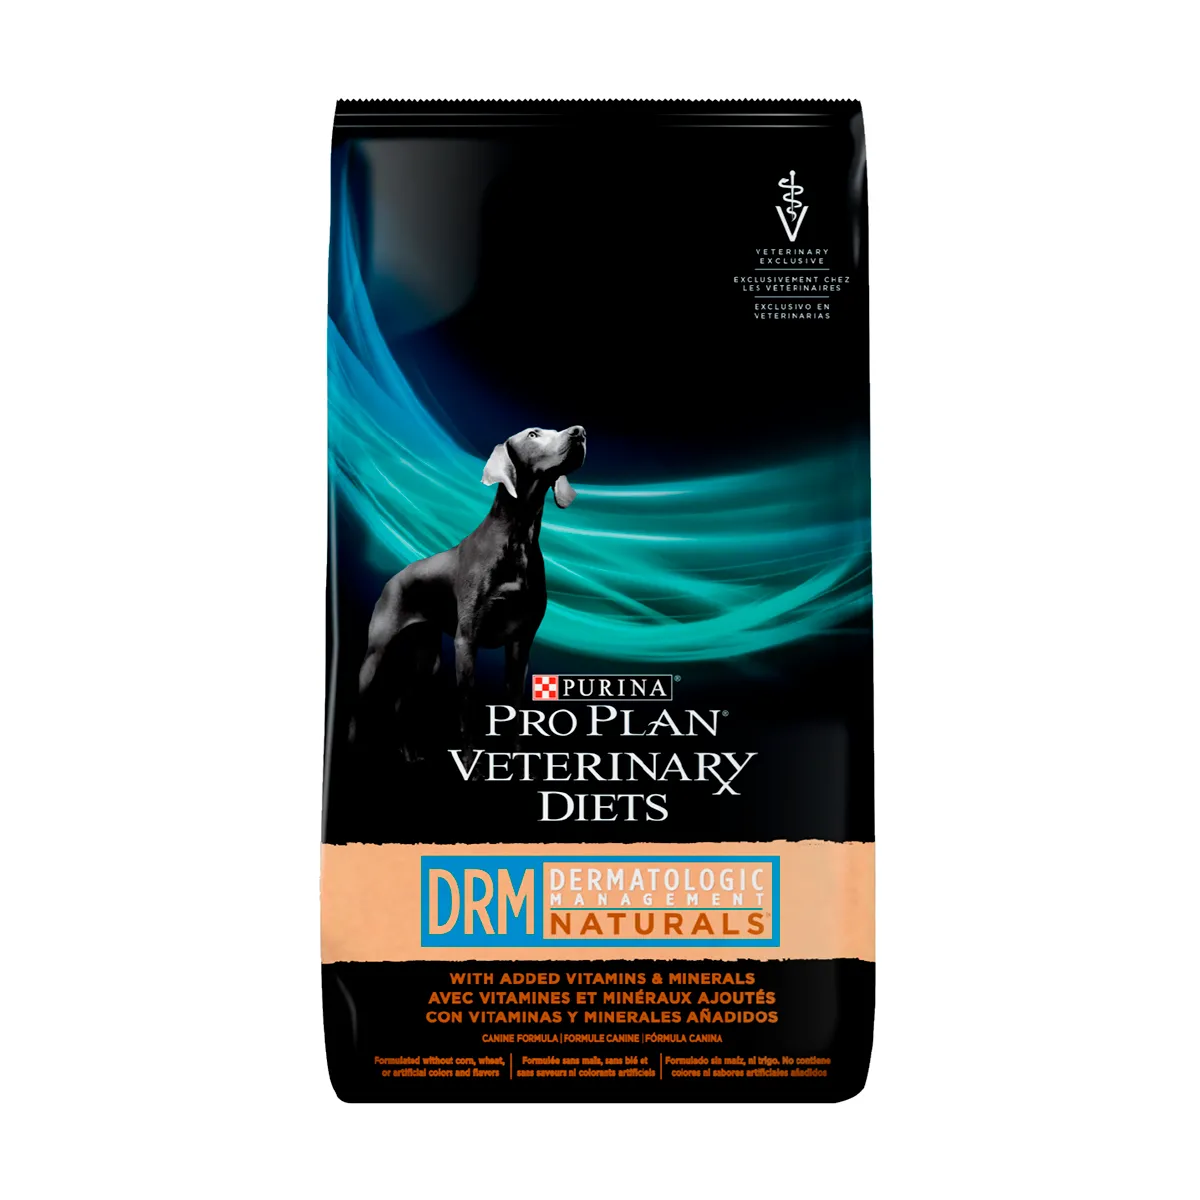 ProPlan-Veterinary-Diets-Dermatologic-MGMT-Naturals-Front